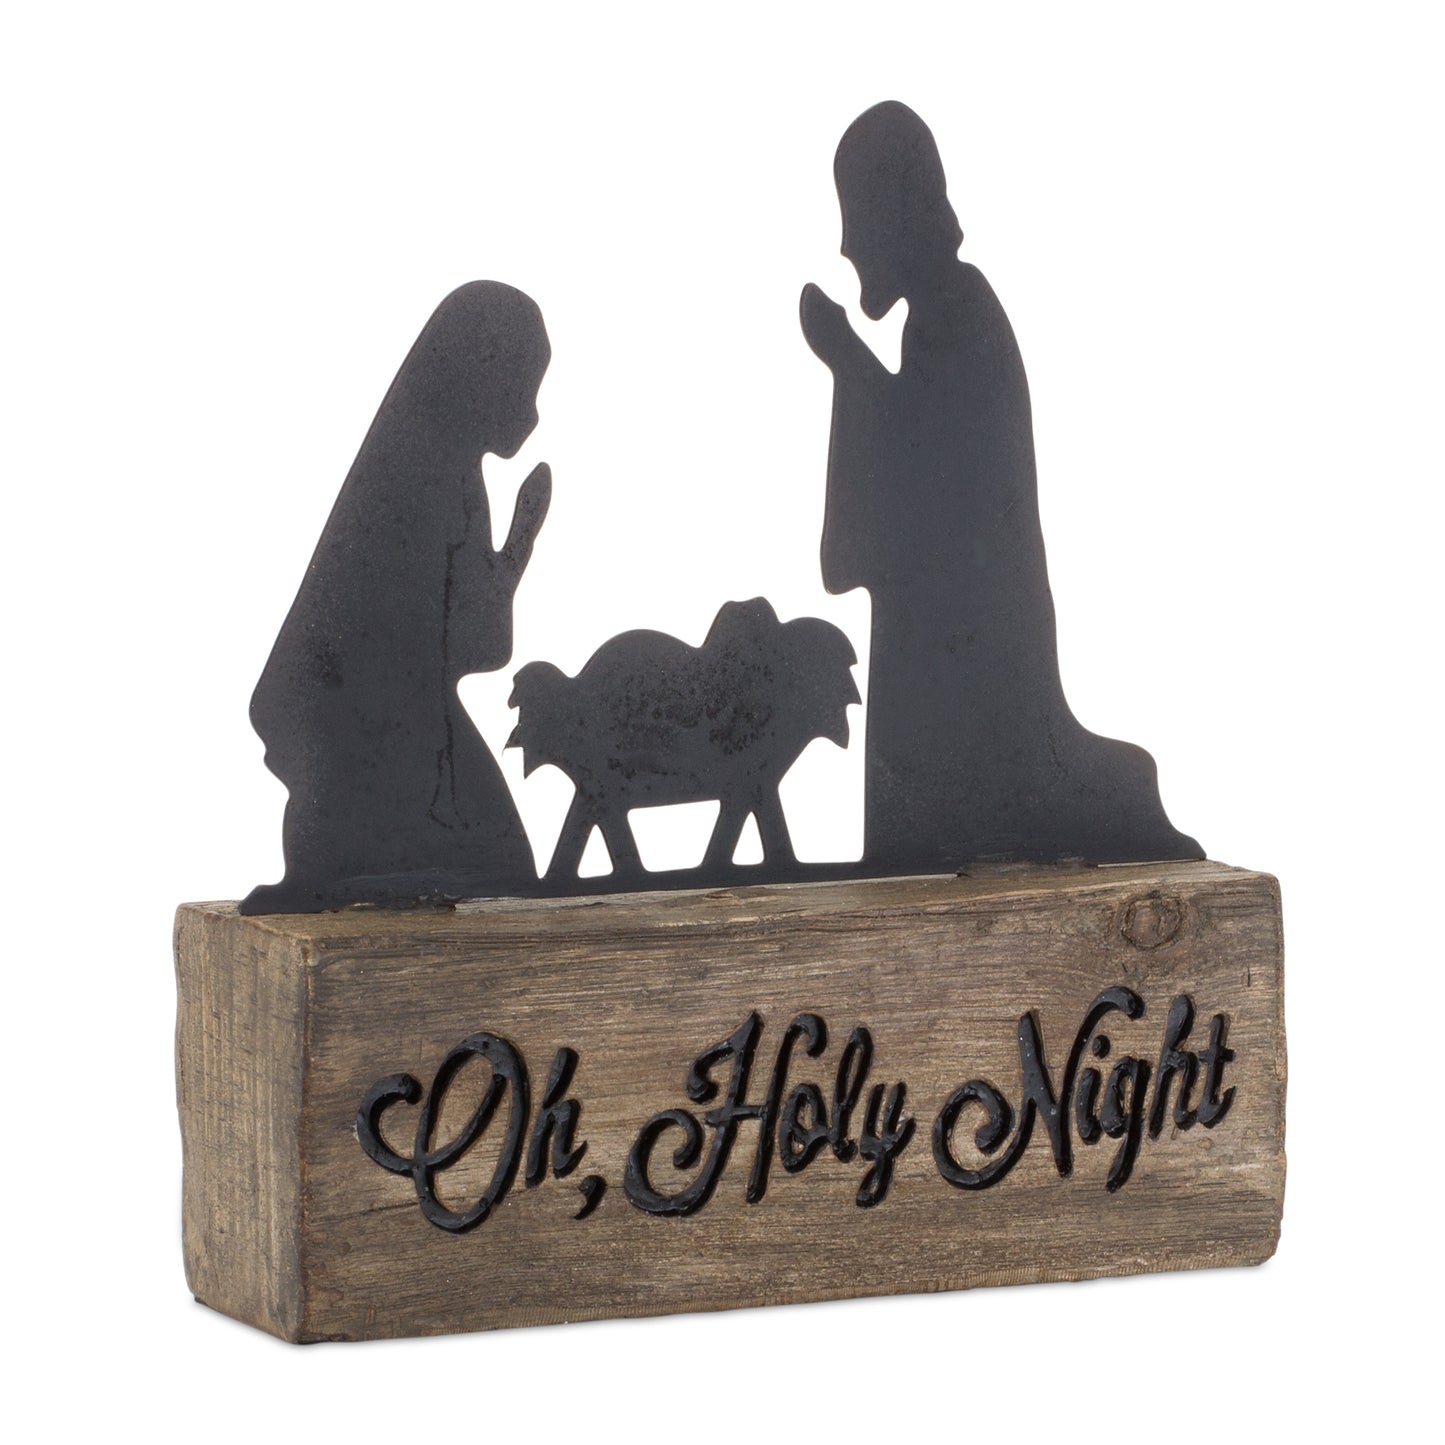 Holy Night Nativity Block with Metal Cut Out Scene 6"H